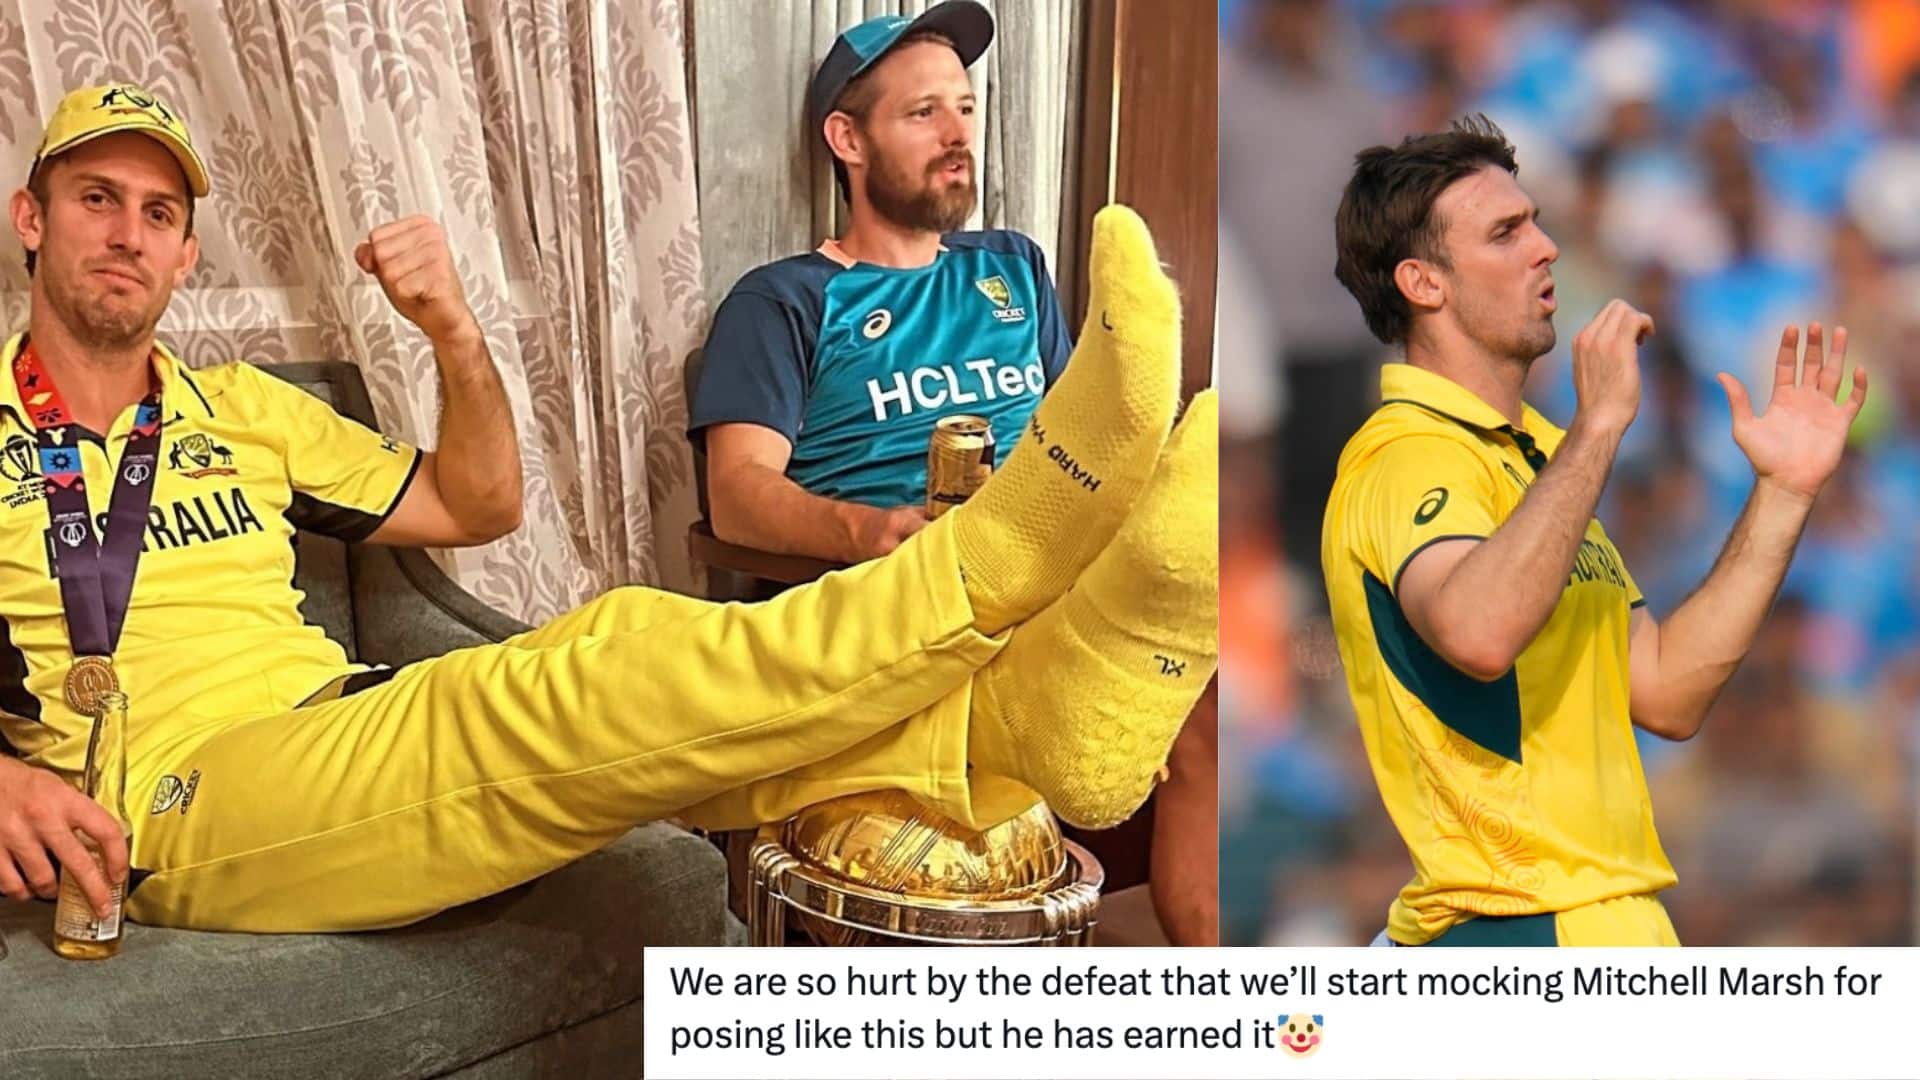 ‘Disgraceful; His Culture’ - Netizens Divided Over Mitch Marsh’s Gesture With World Cup